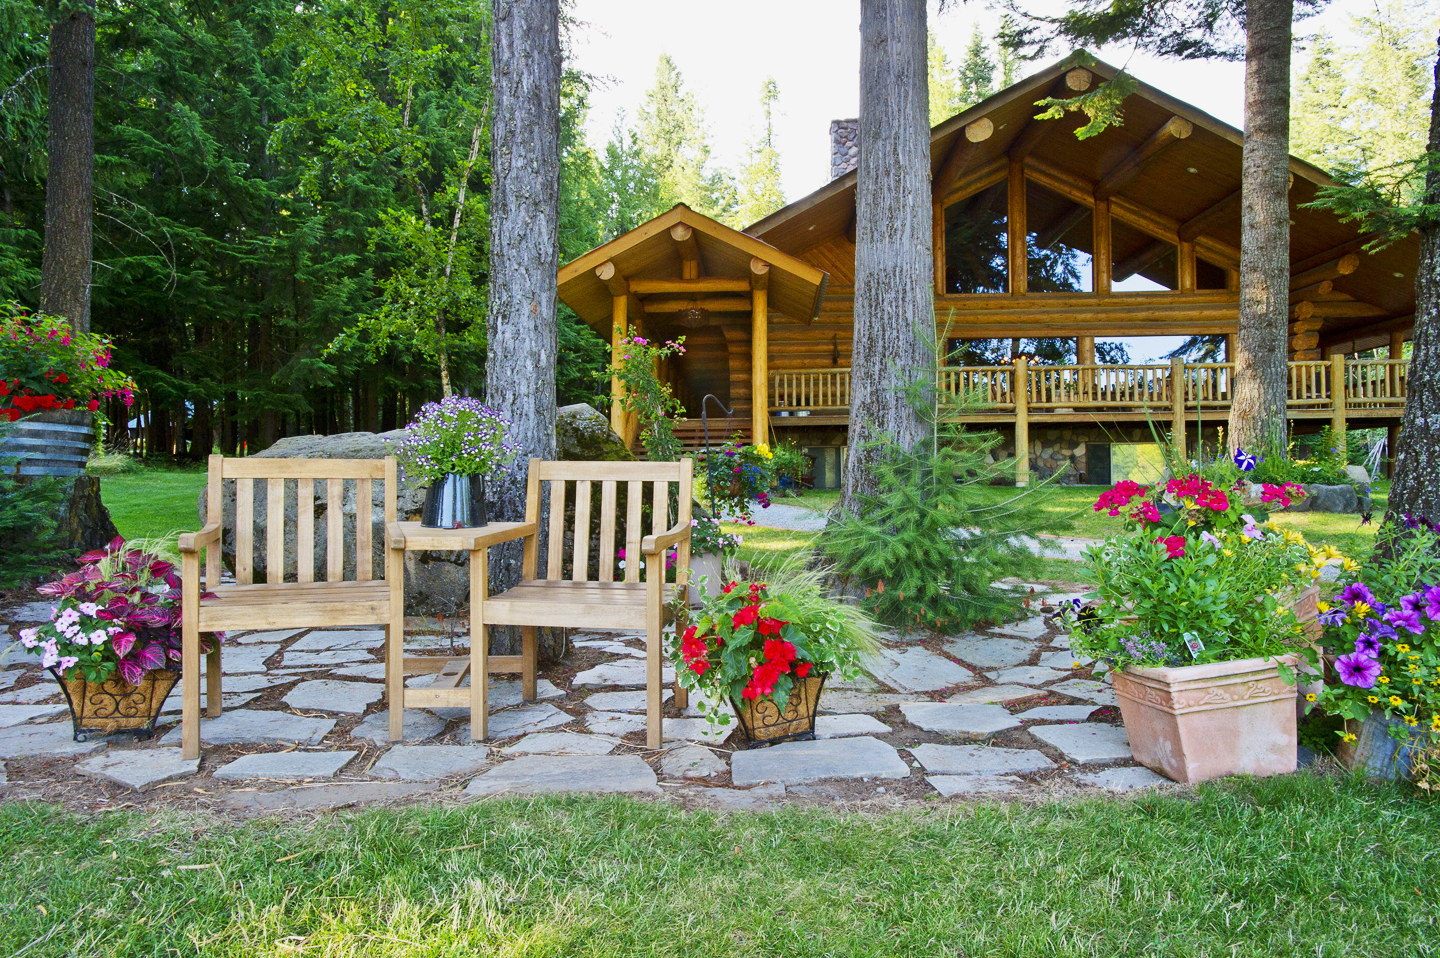 Large log lodge in the background with relaxing chairs in the foreground with flowers around them